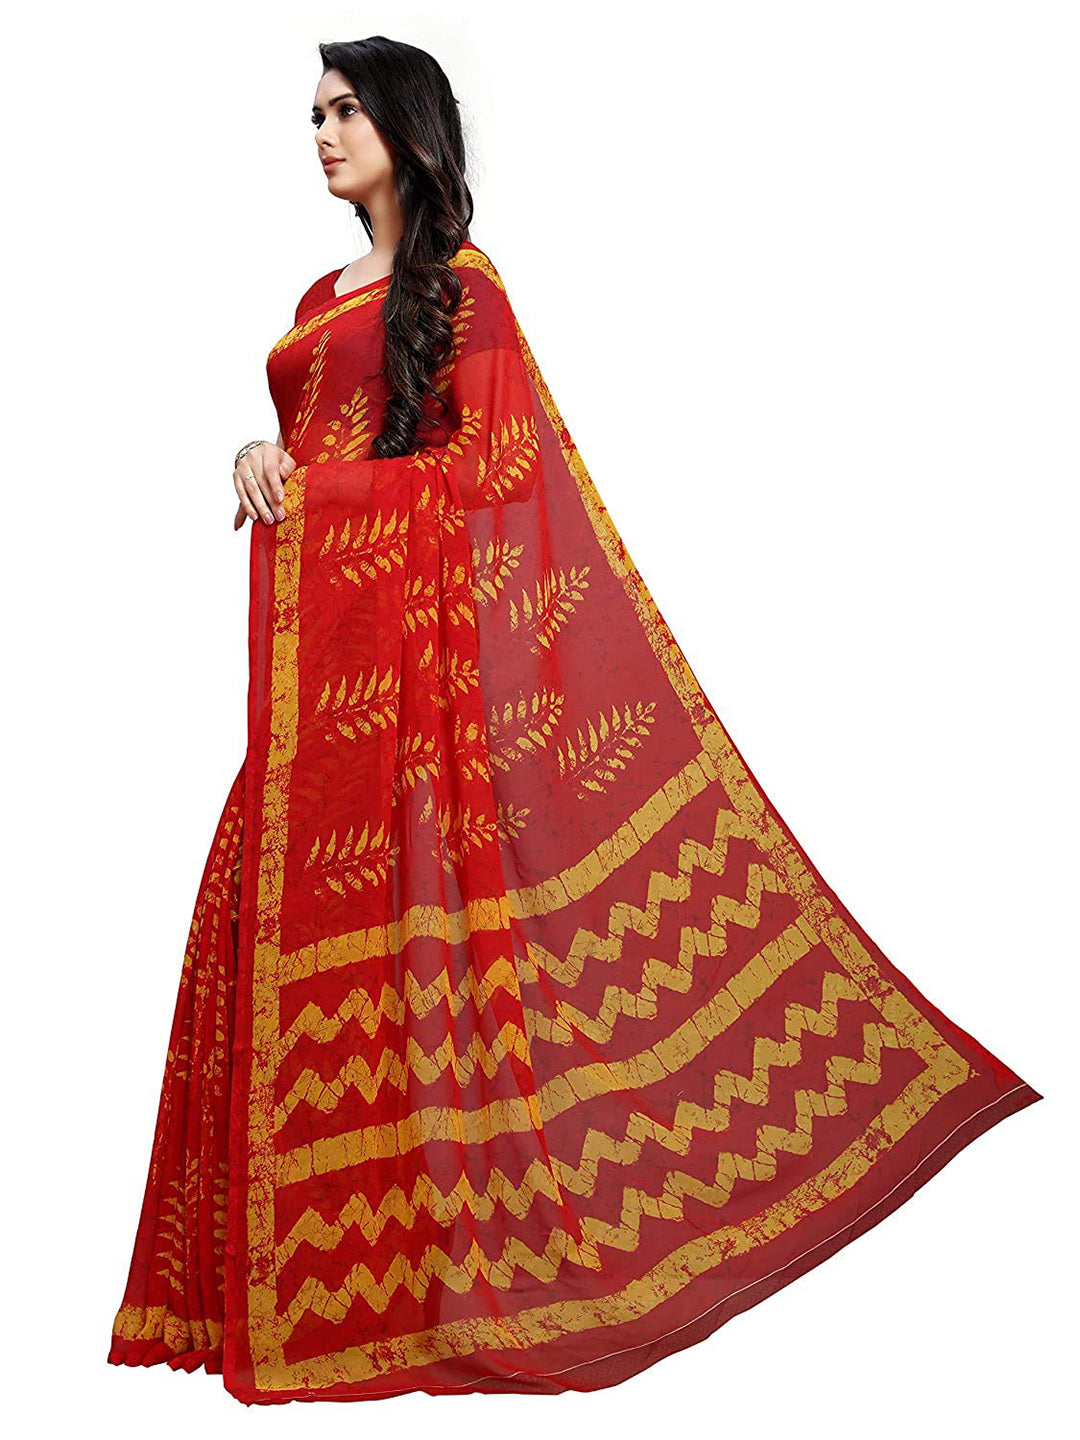 Women's Red Georgette Dyed Saree - Ahika